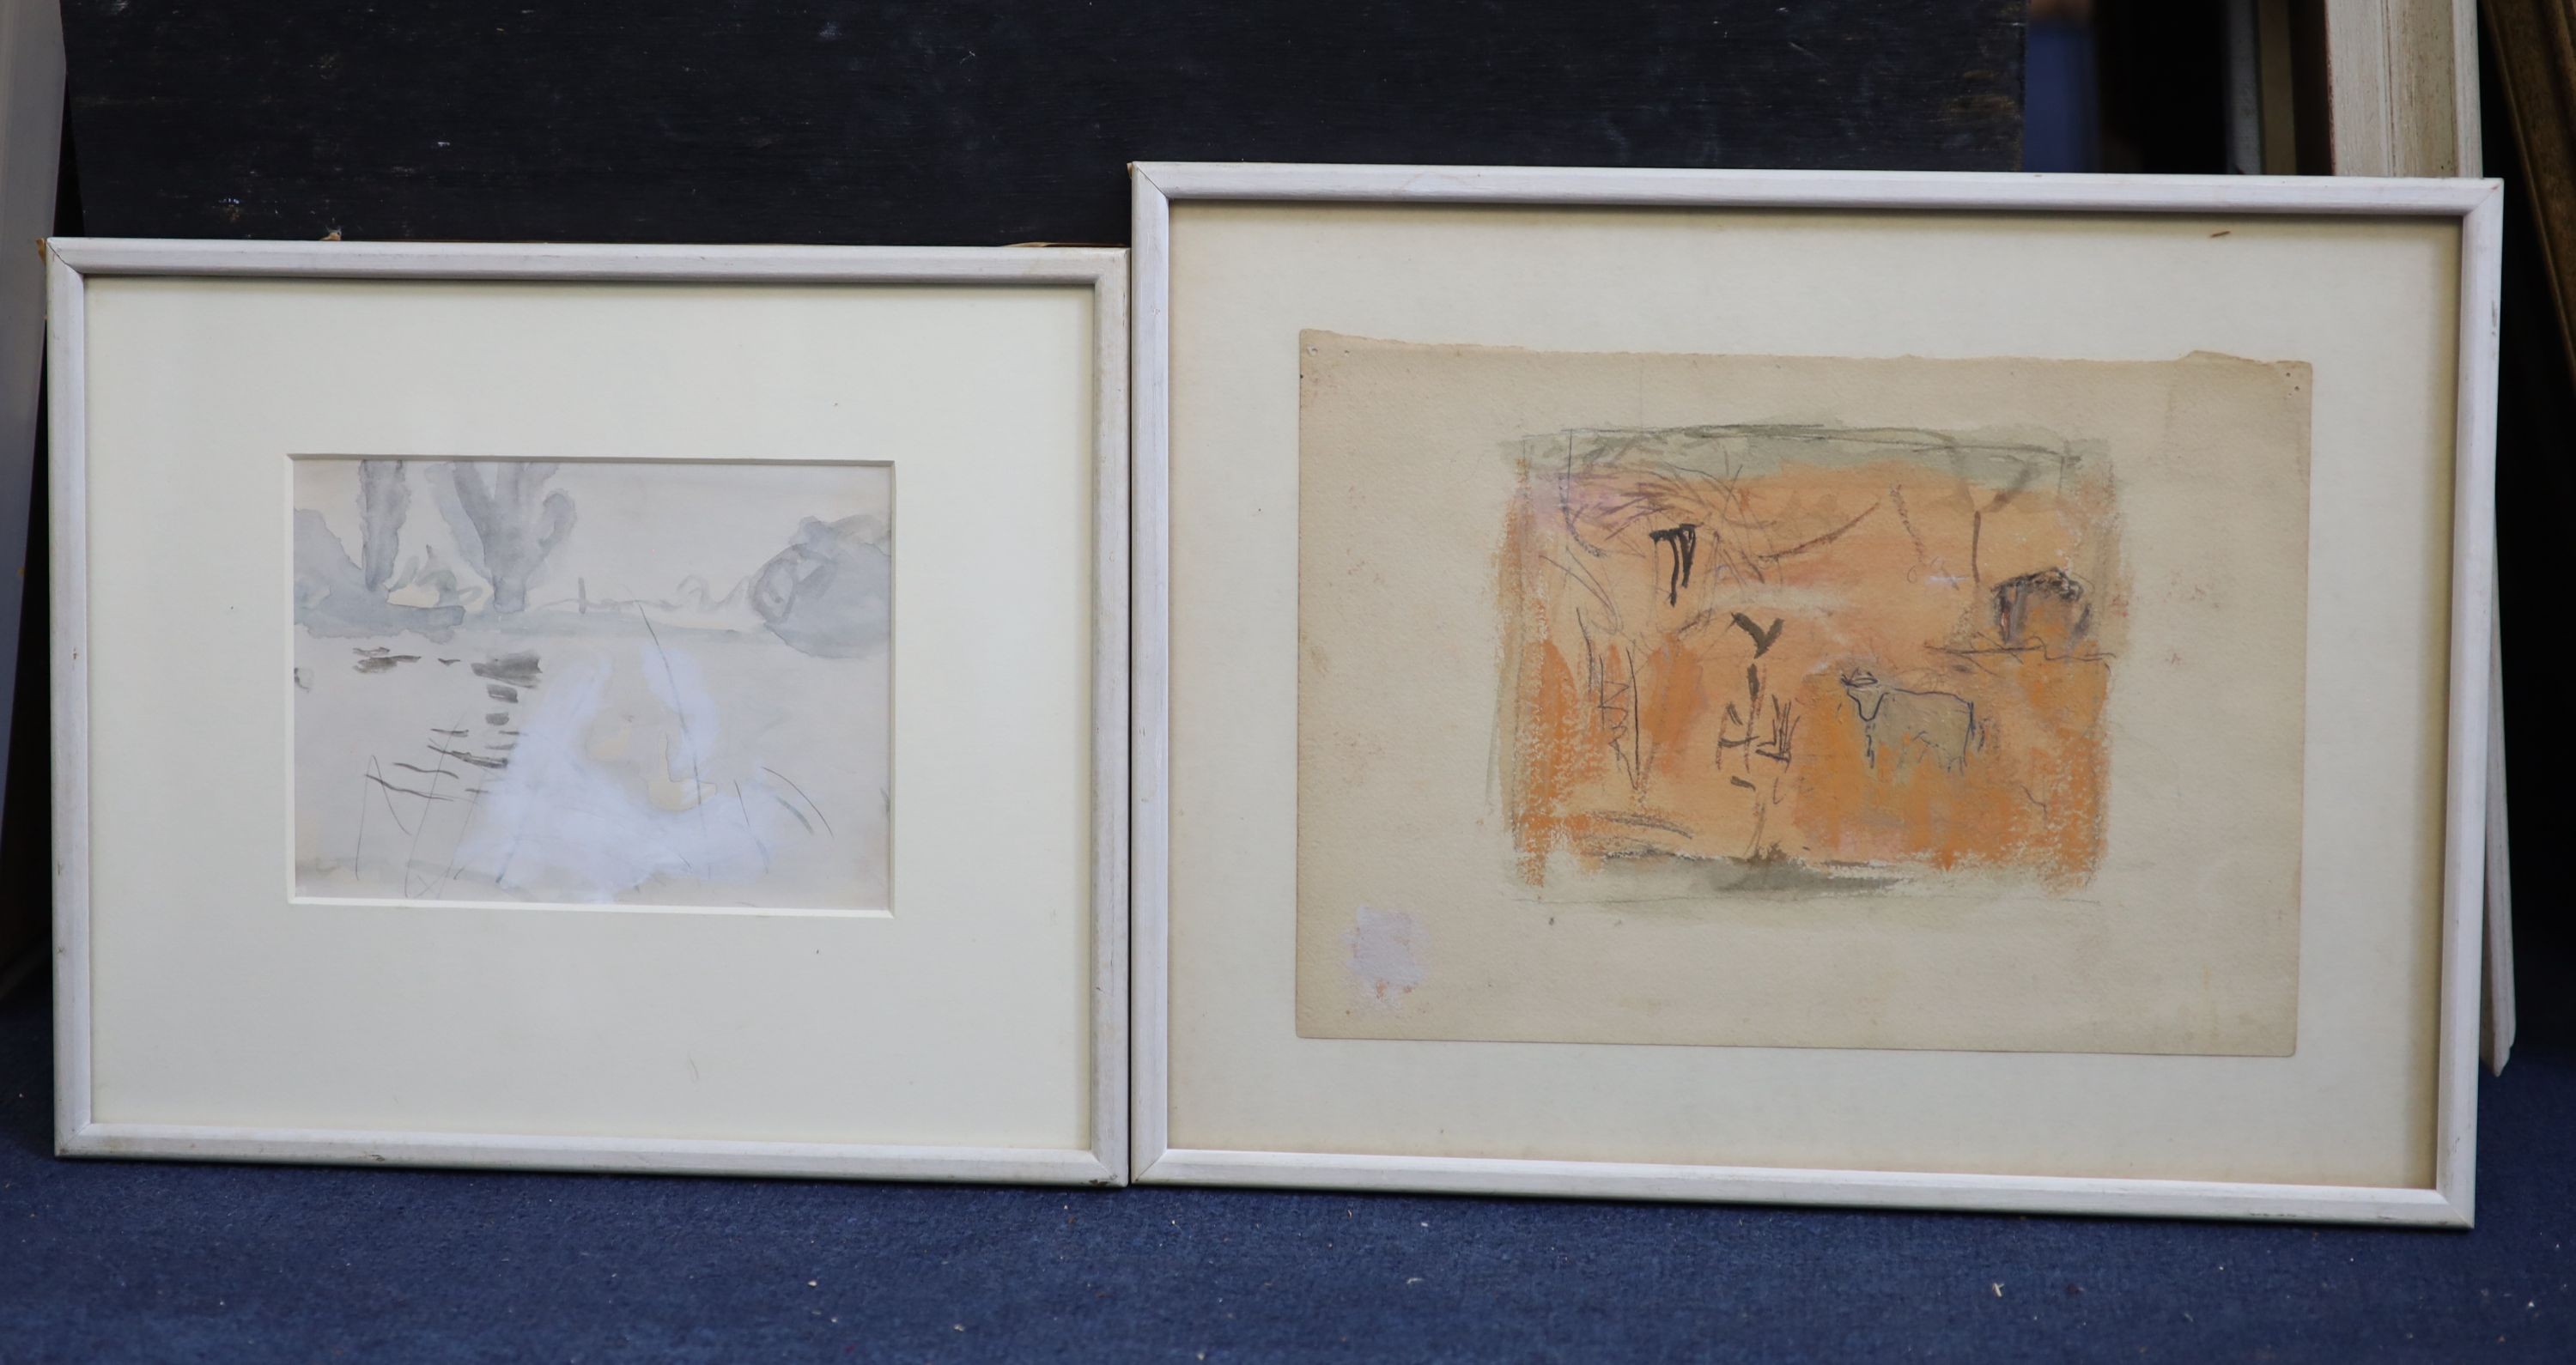 Mary Potter (1900-1981), Red Landscape & The Mere, Two watercolours, 18 x 26cm & 12 x 16cm.